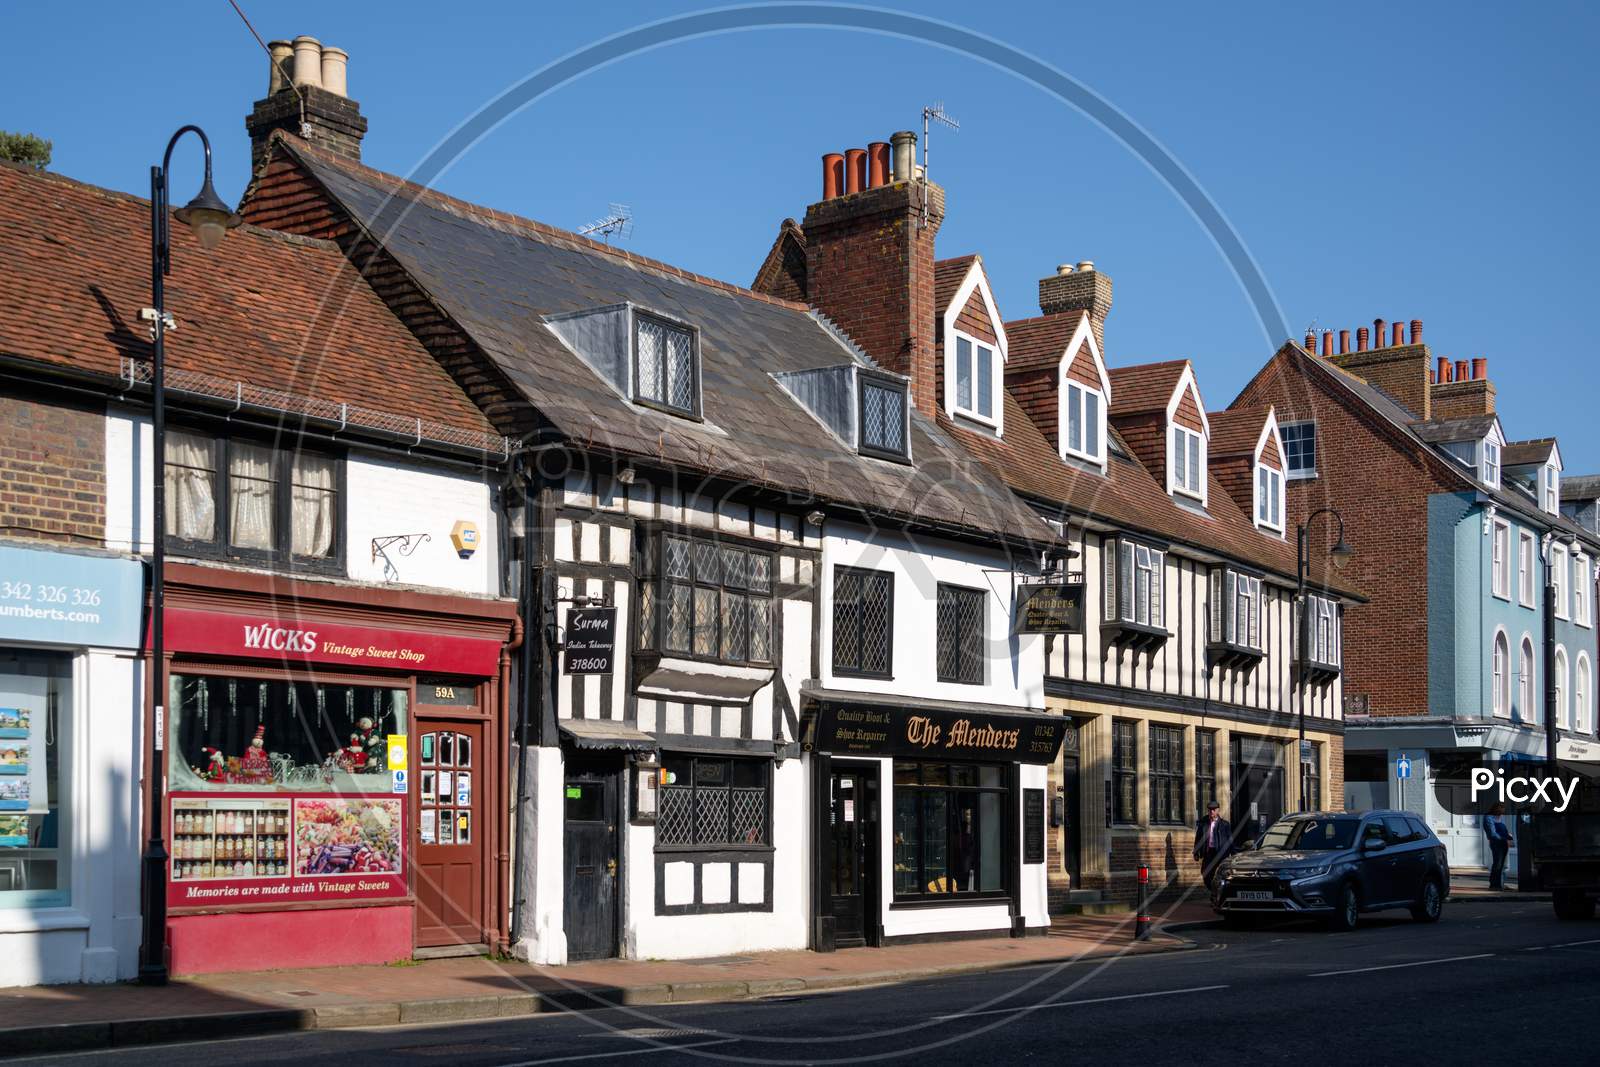 East Grinstead, West Sussex, Uk - March 1: View Of Shops In The High Street In East Grinstead On March 1, 2021. Two Unidentified People